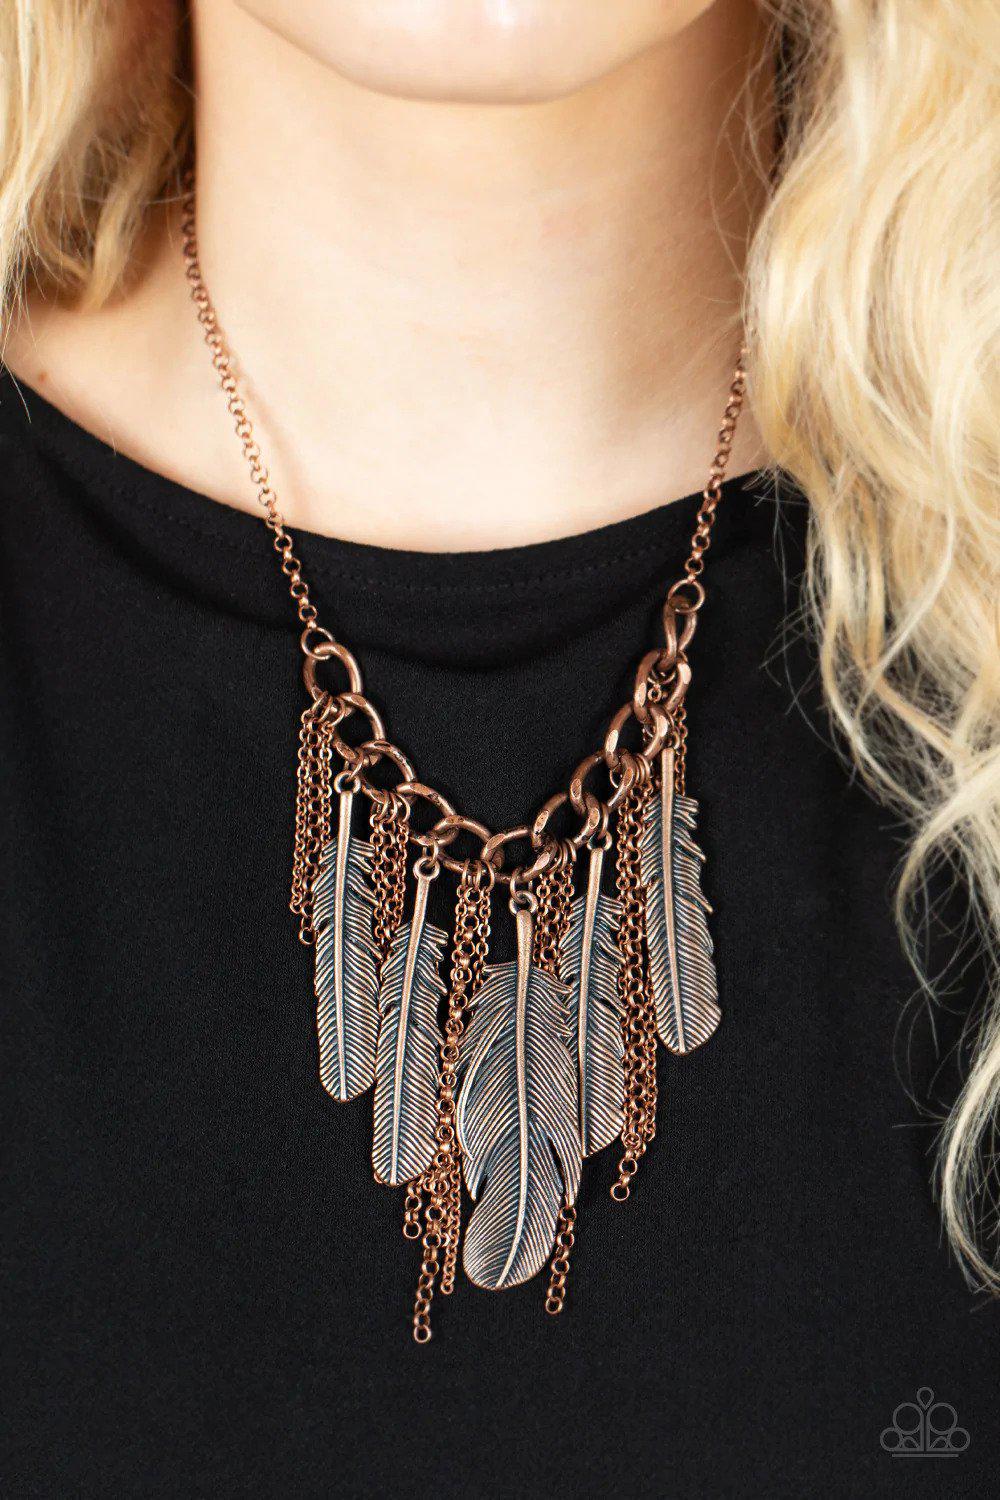 NEST Friends Forever Copper Necklace - Paparazzi Accessories- lightbox - CarasShop.com - $5 Jewelry by Cara Jewels